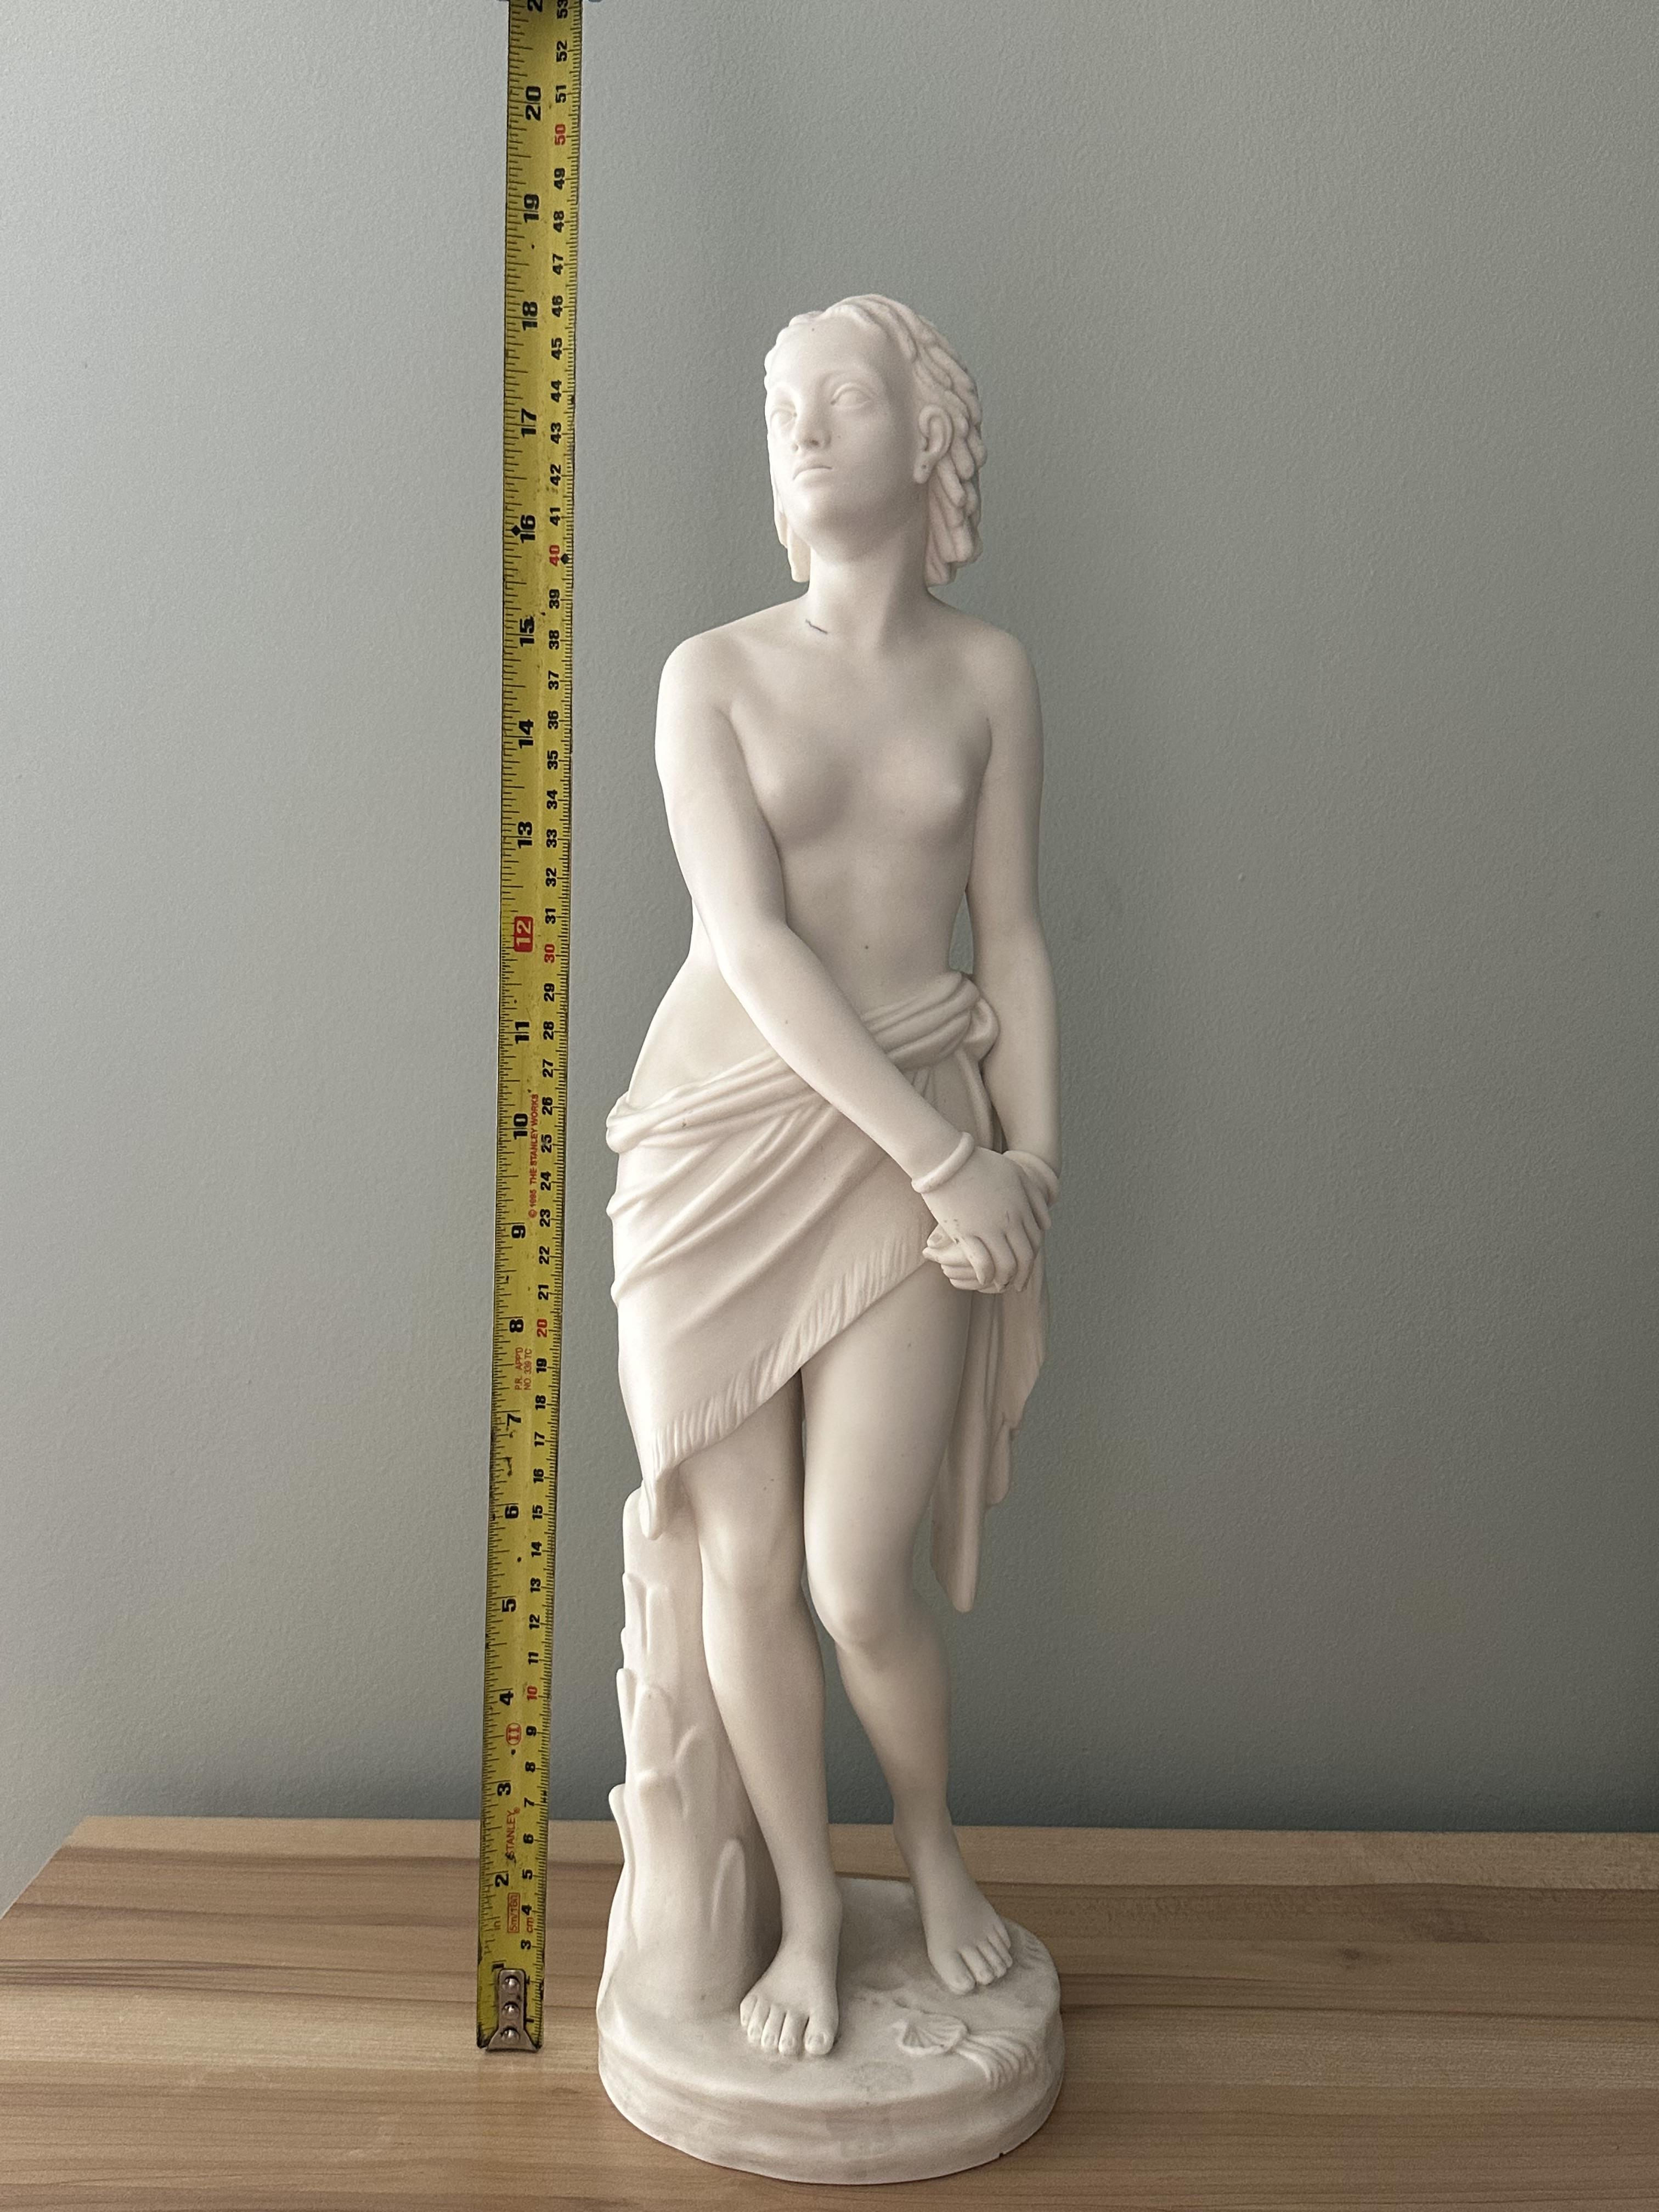 Parian Ware Minton Sculpture by John Bell. One ha - Image 14 of 16